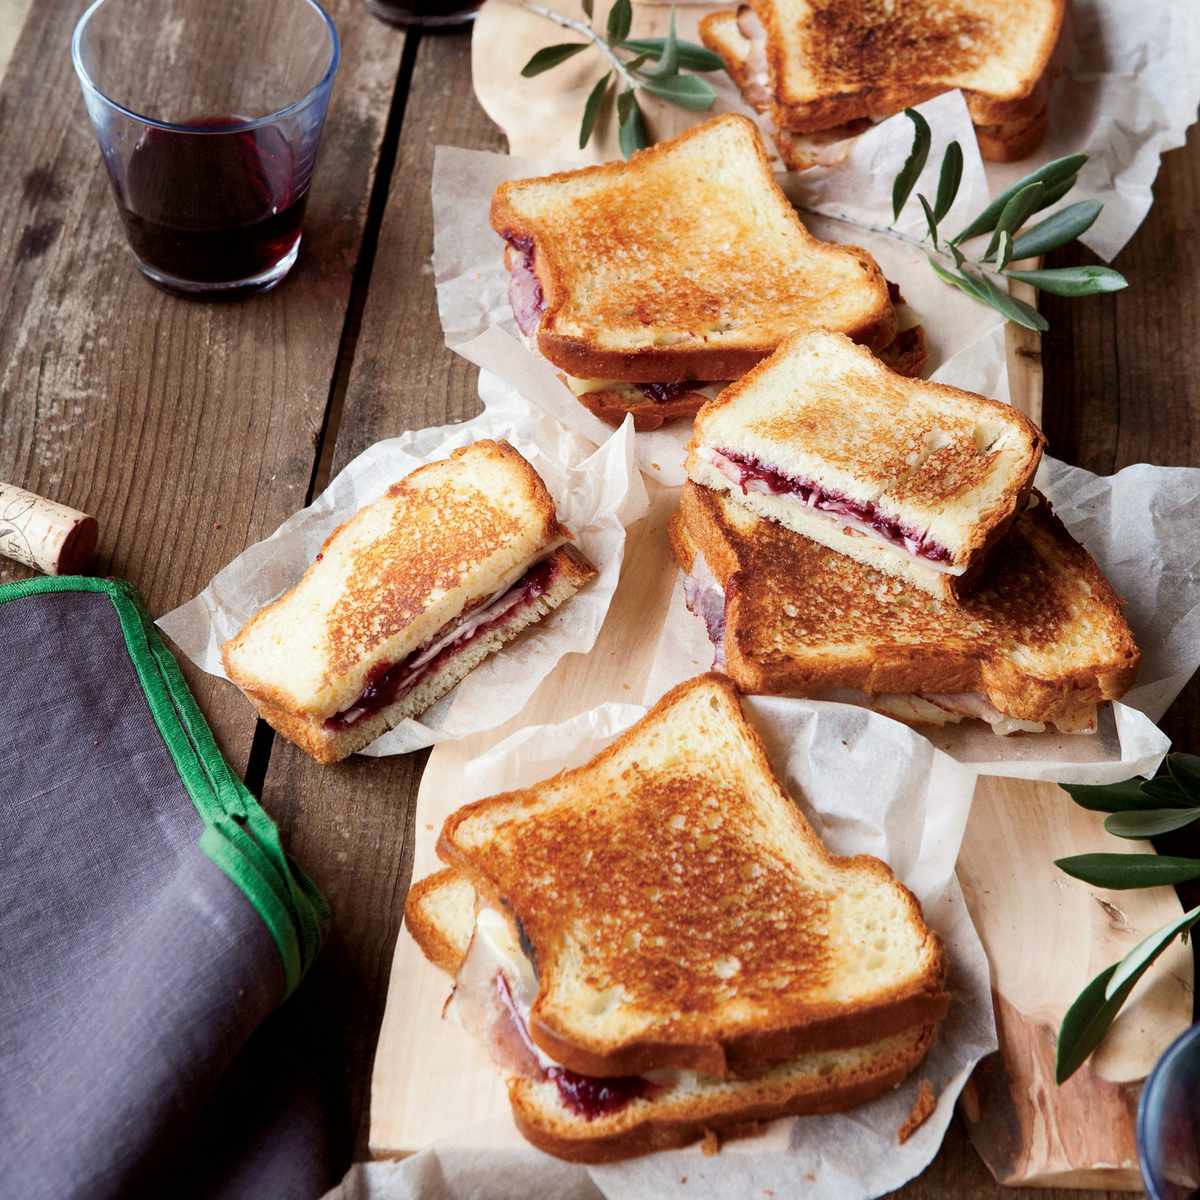 The Best Bread for Grilled Cheese